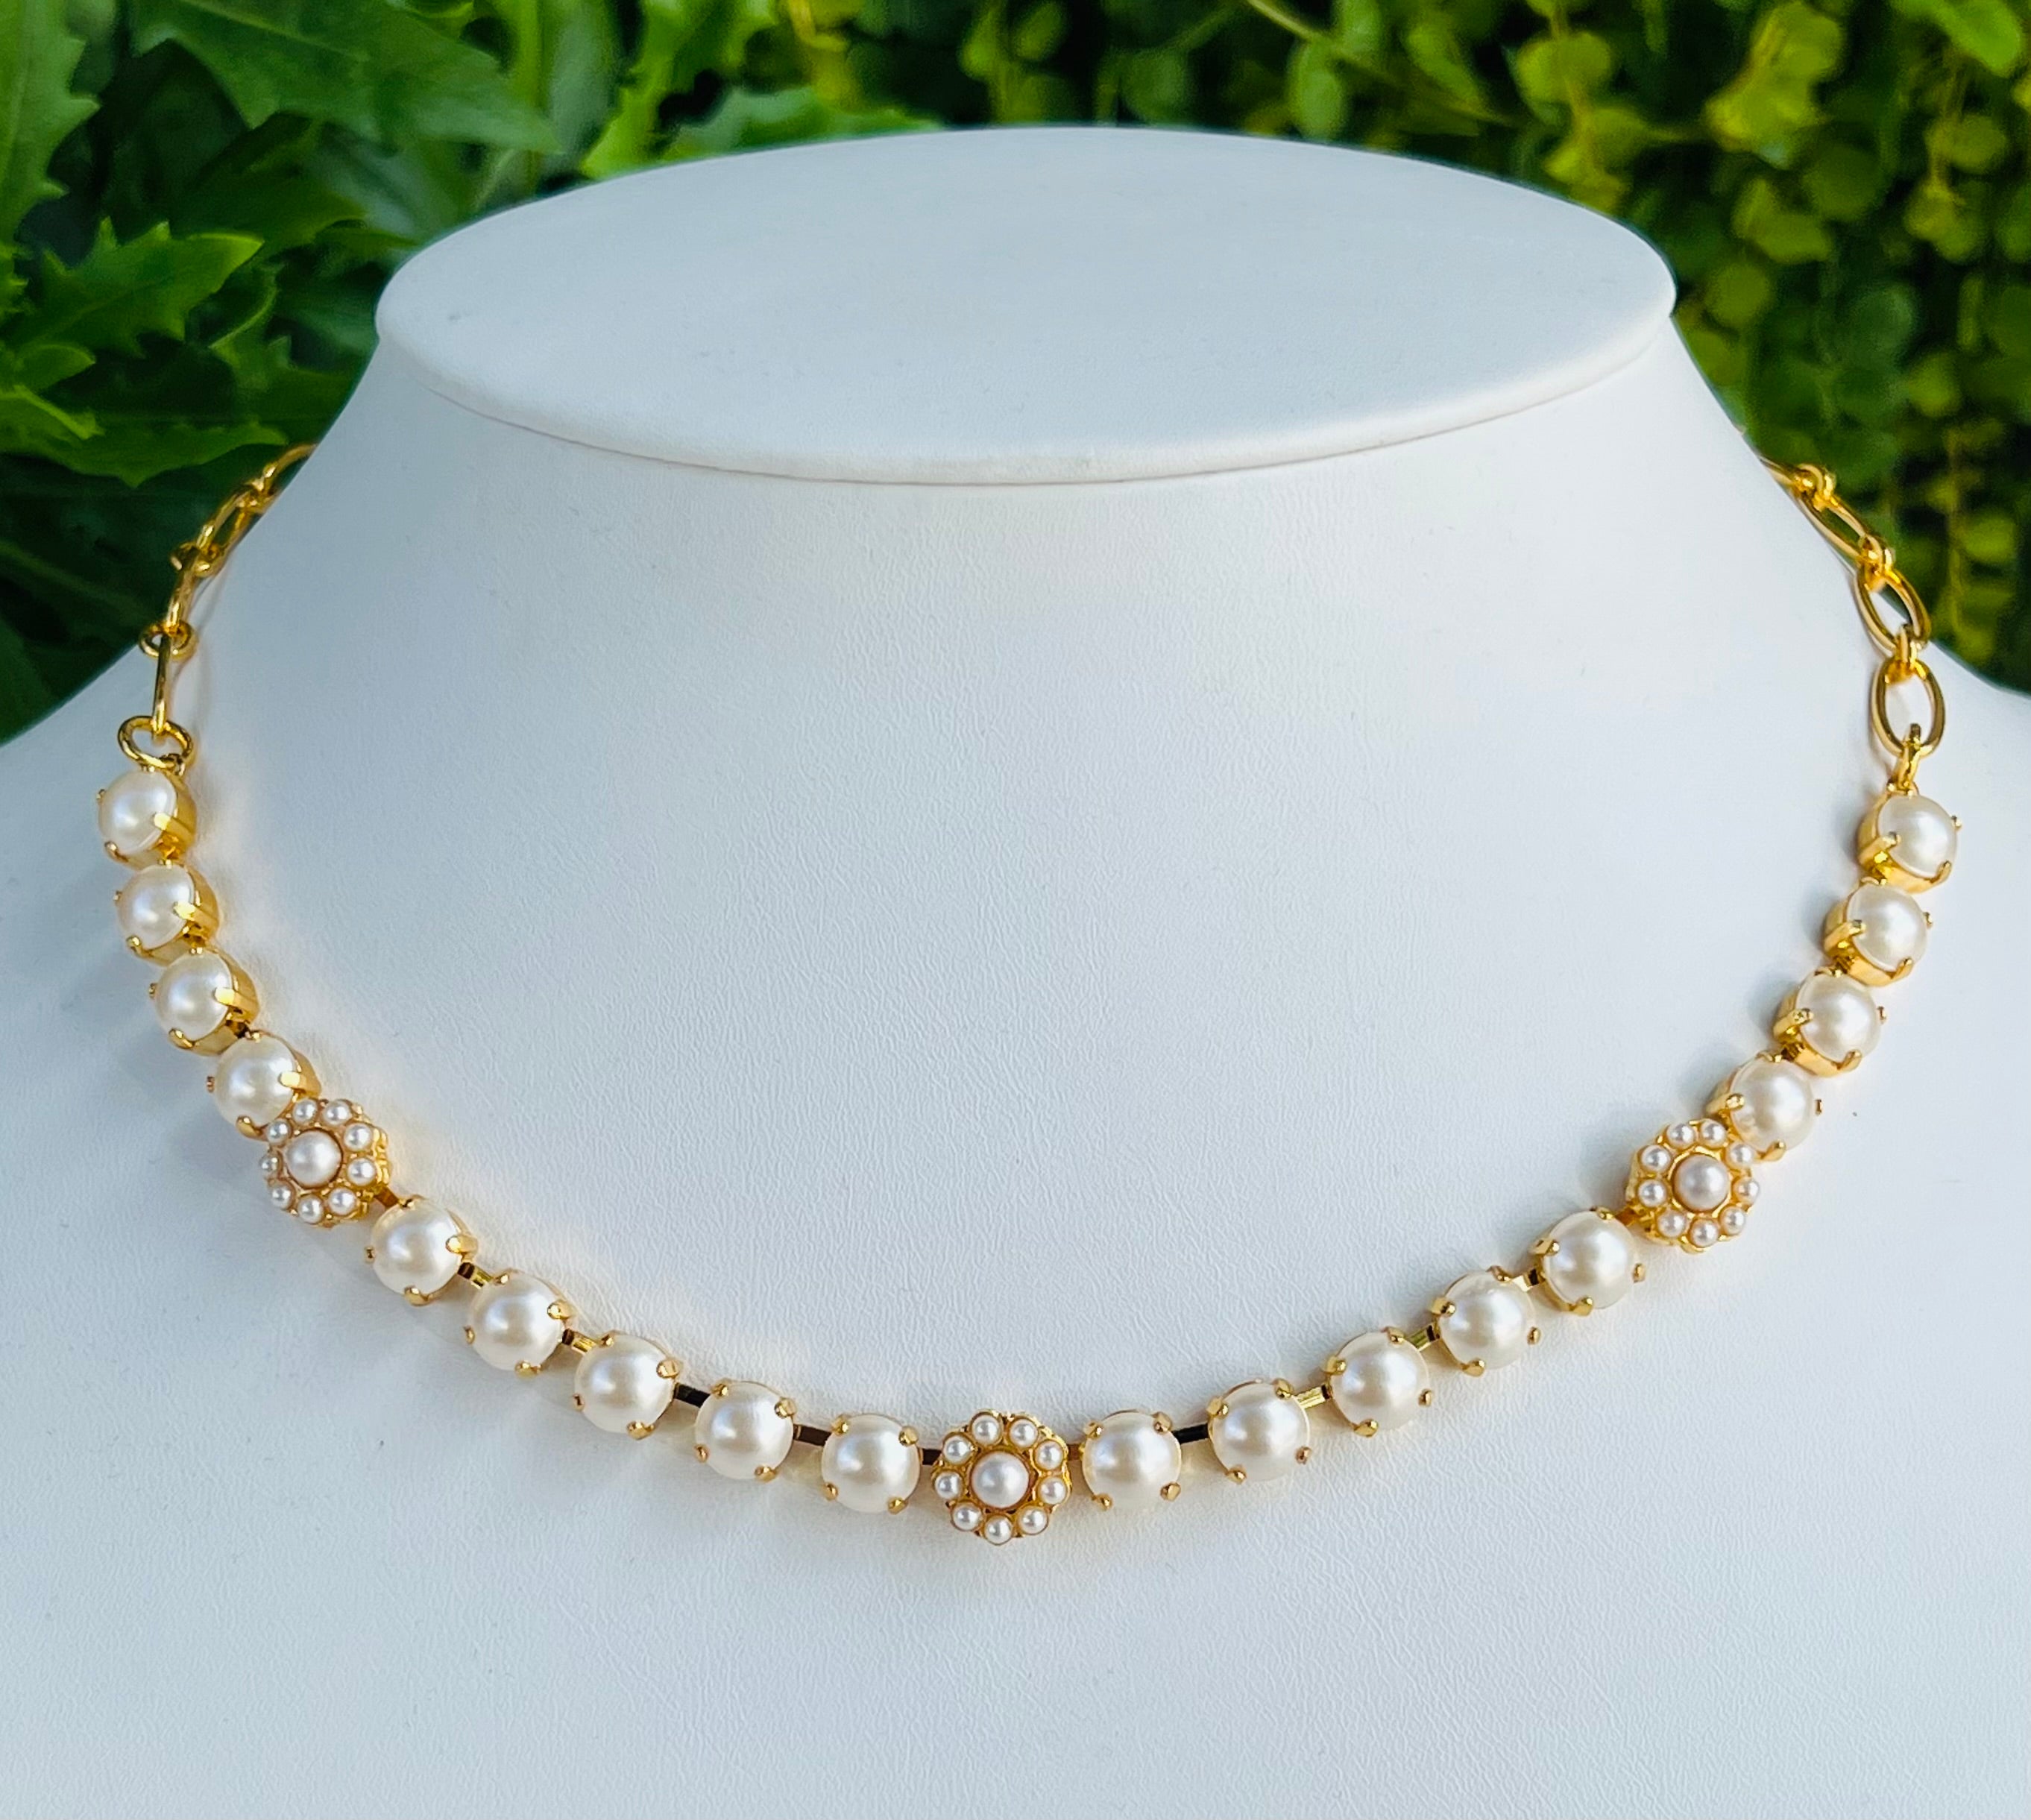 Mariana Gold Flower Crystal Necklace in "Pearl"